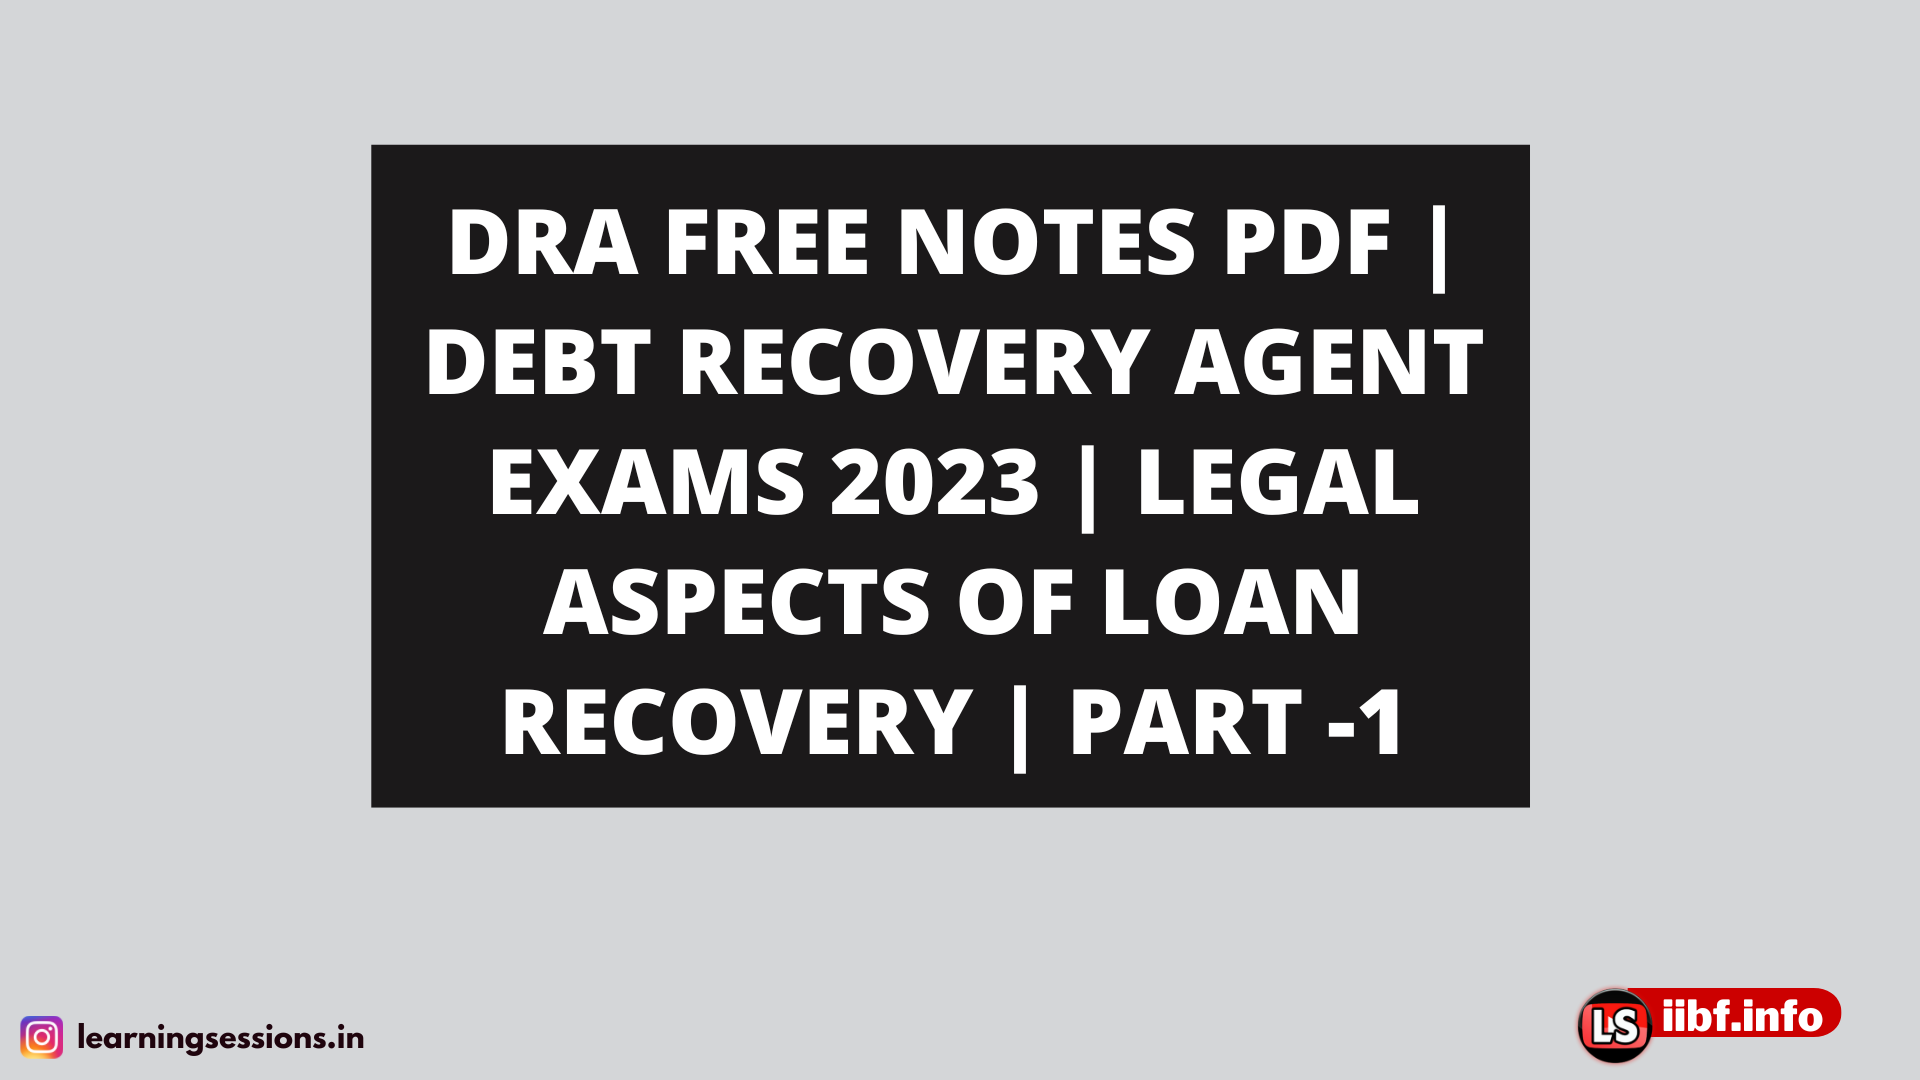 DRA FREE NOTES PDF | DEBT RECOVERY AGENT EXAMS 2023 | LEGAL ASPECTS OF LOAN RECOVERY | PART -1